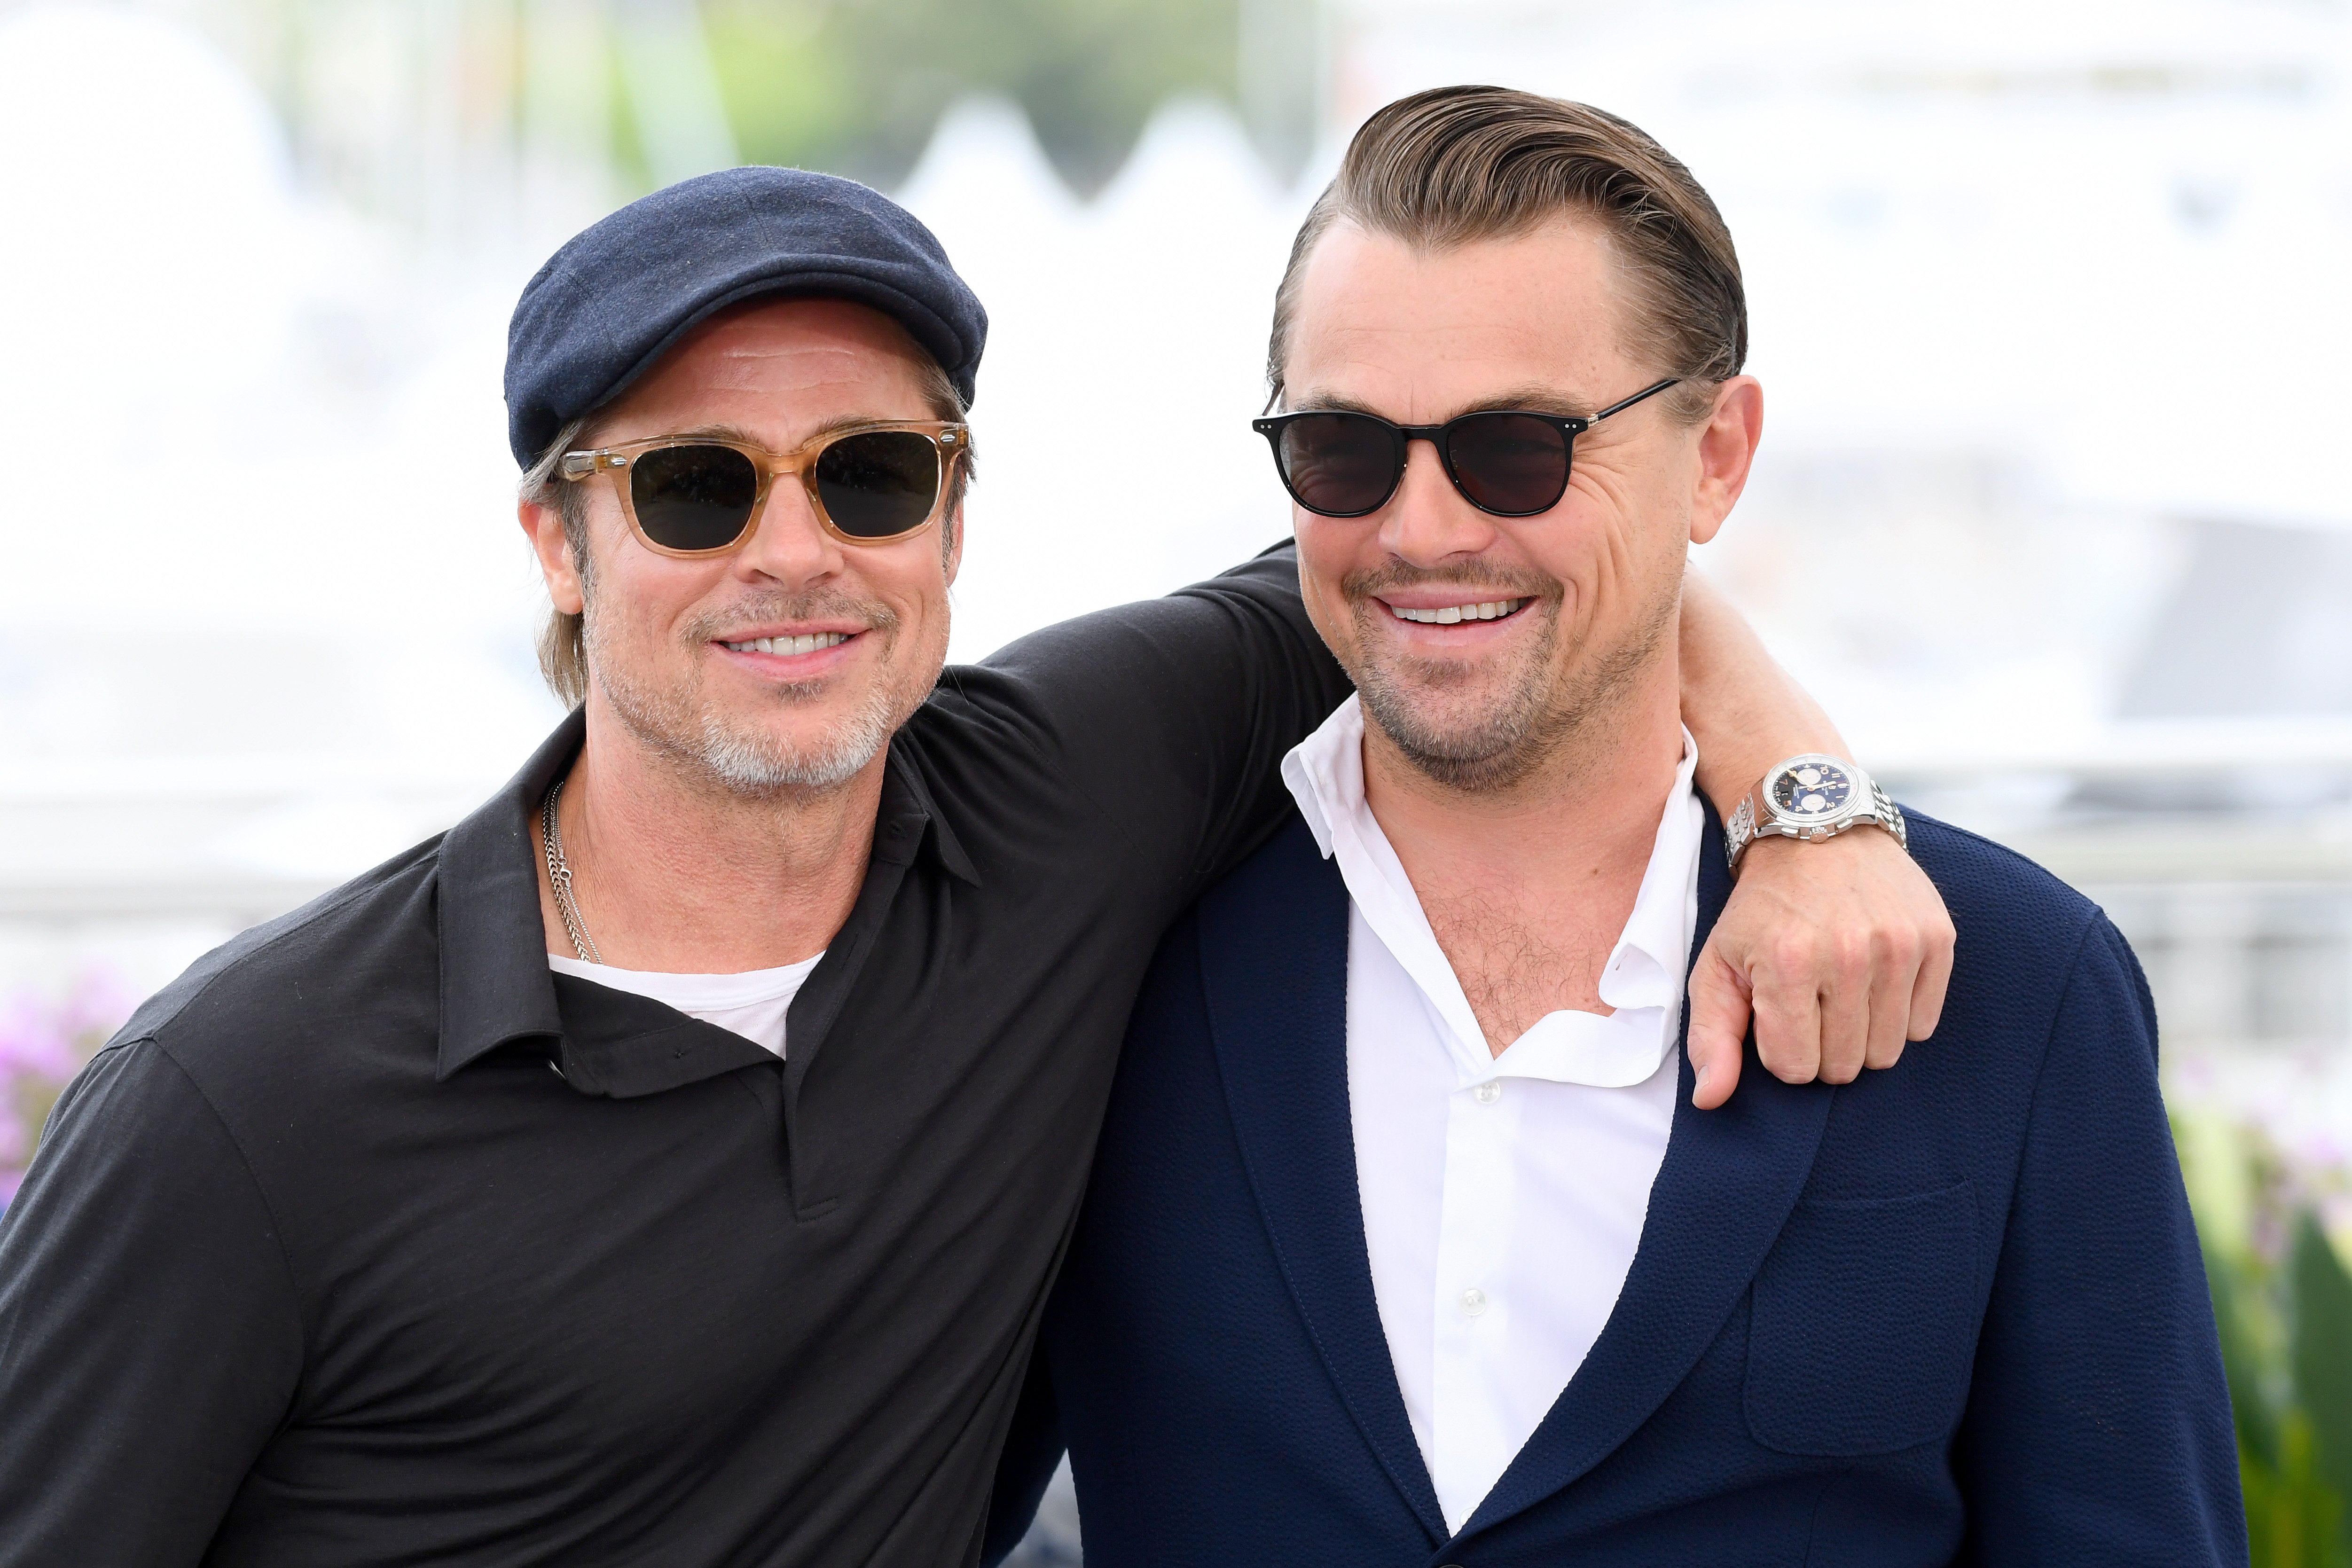 Brad Pitt and Leonardo Dicaprio, who once starred in a Martin Scorsese short film, stand in a bromance friendship pose after working on Once Upon a Time in hollywood